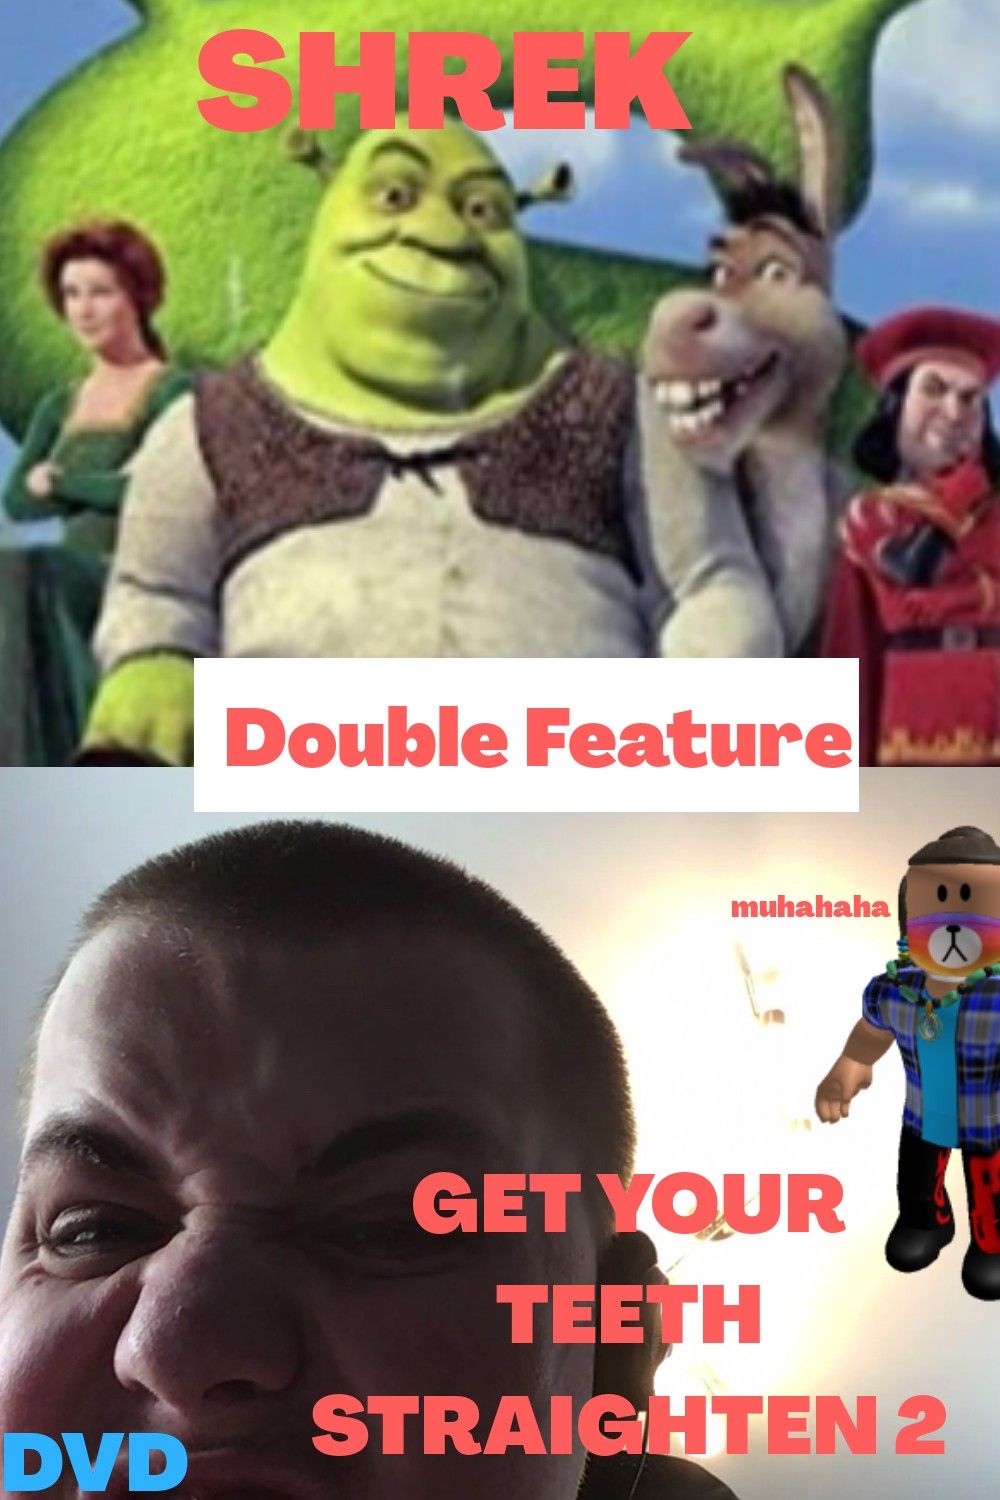 Double Feature Of Shrek And Get Your Teeth Straighten 2 DVDS